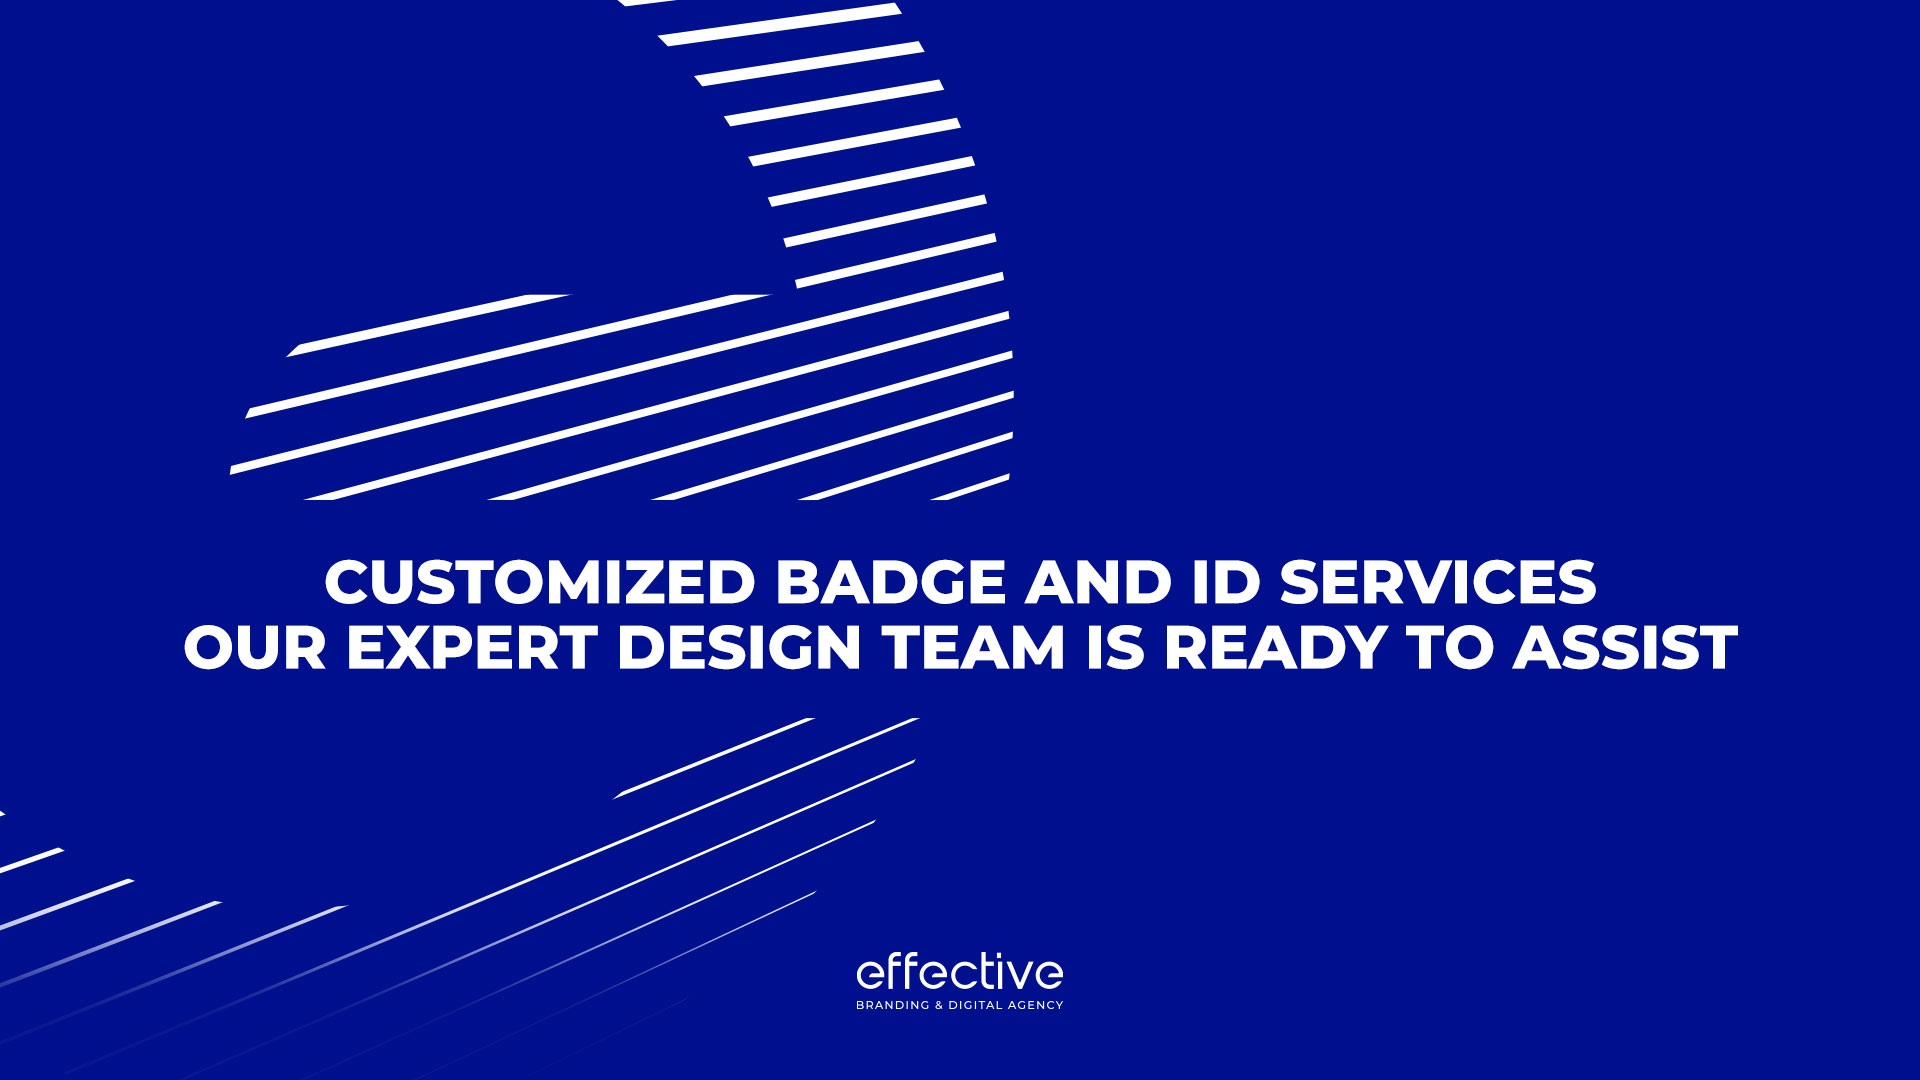 Customized Badge and ID Services: Our Expert Design Team Is Ready to Assist